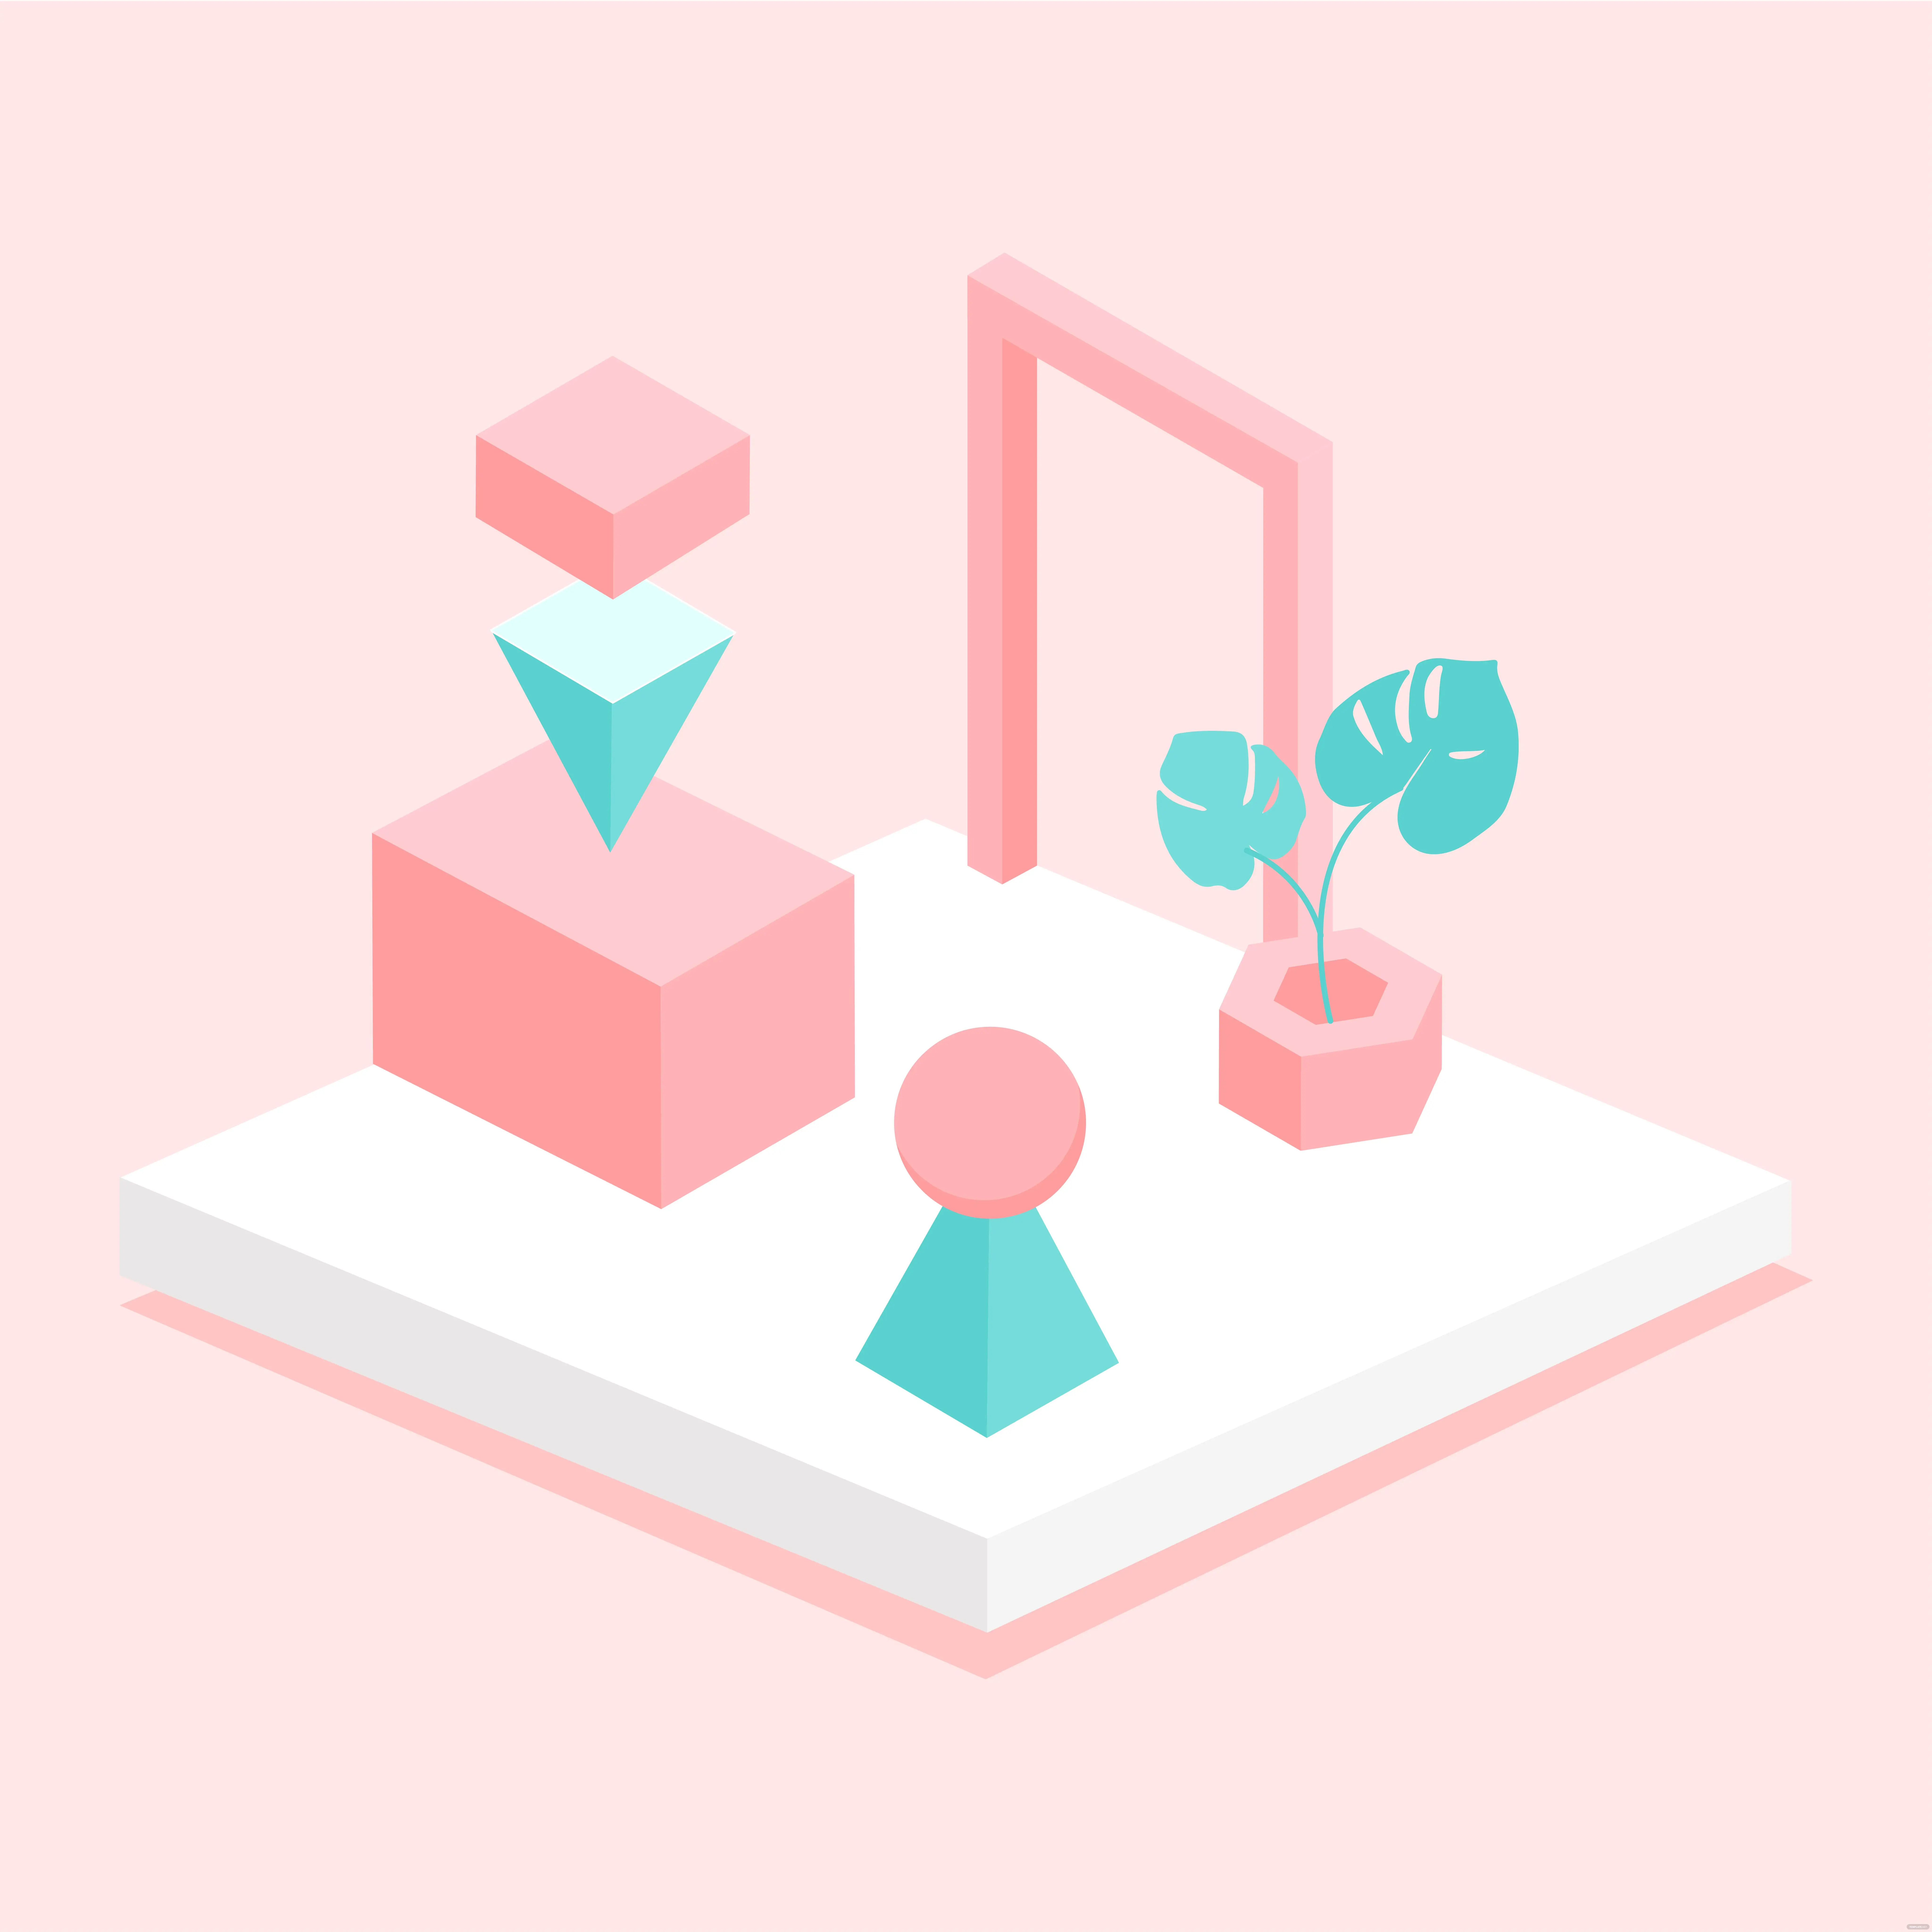 isometric illustrations ideas and examples